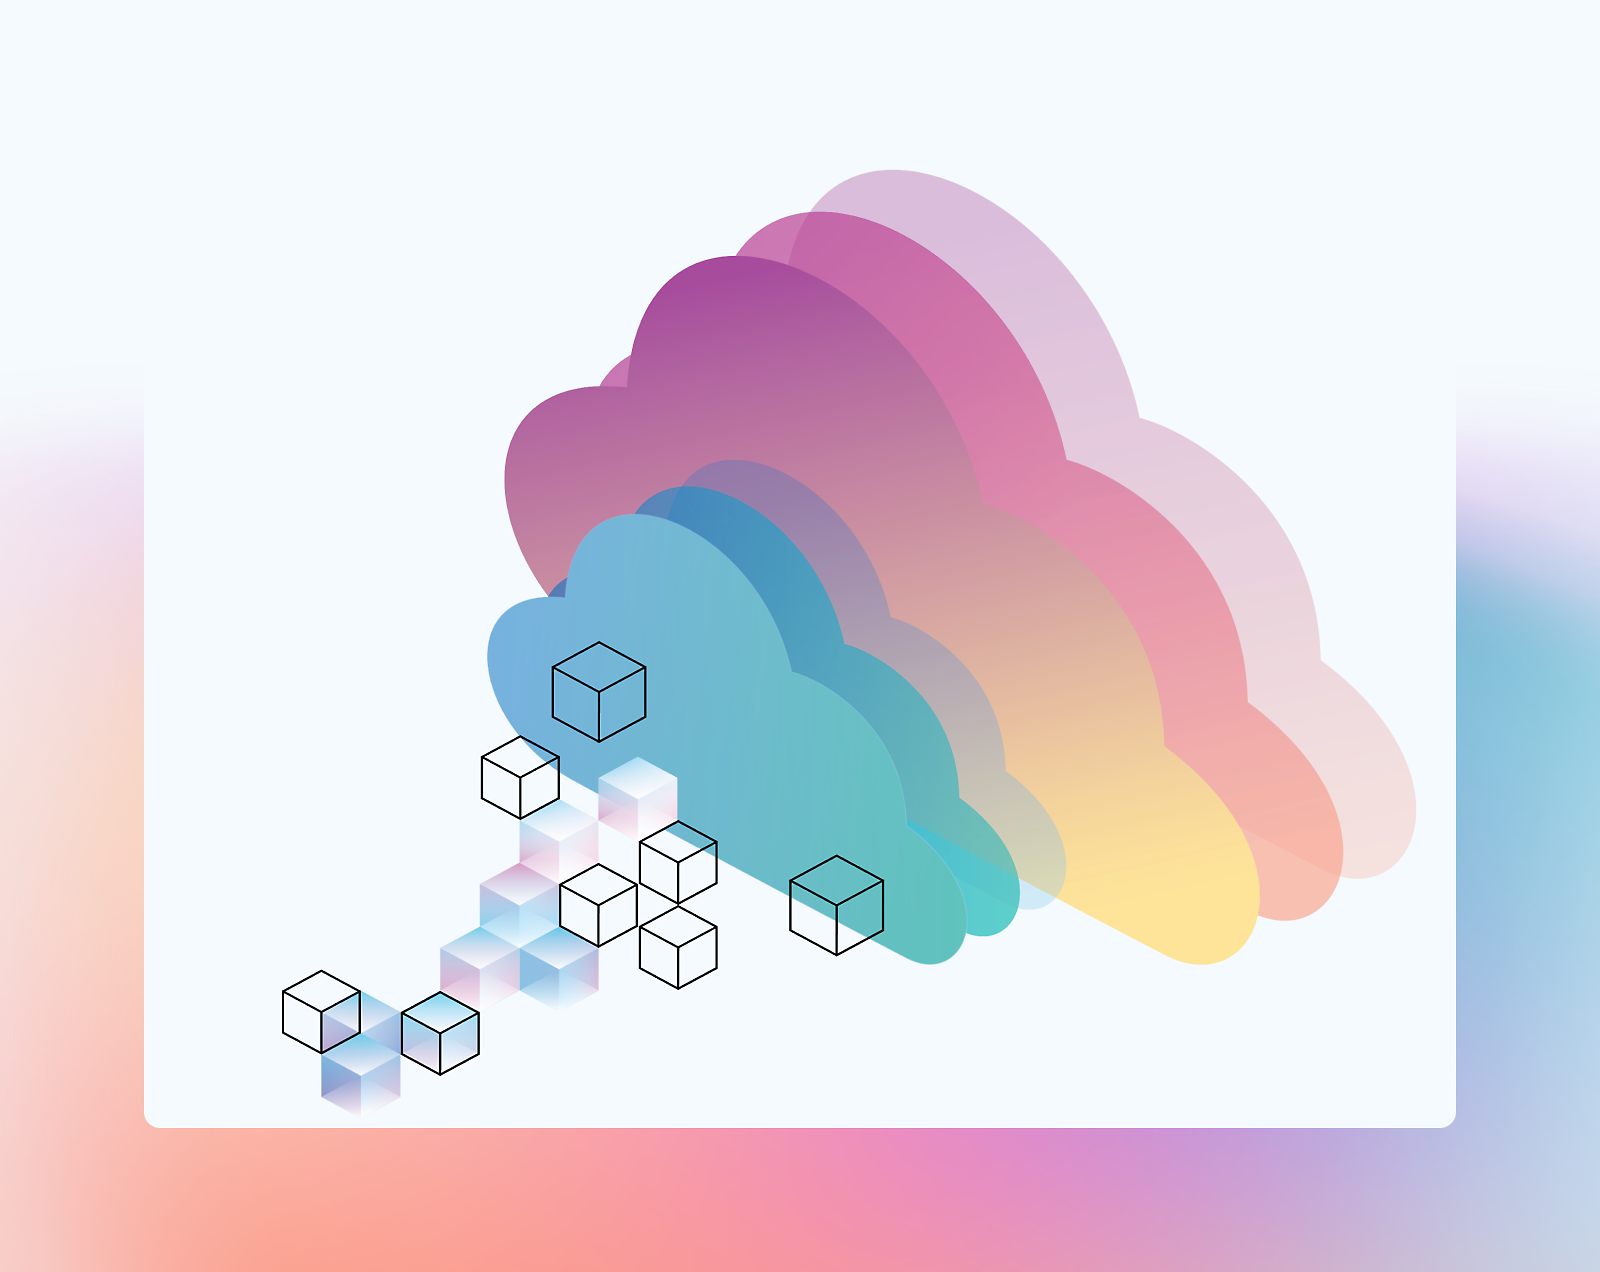 Colorful, layered cloud illustration with descending 3d cubes, creating a sense of depth and digitization, 